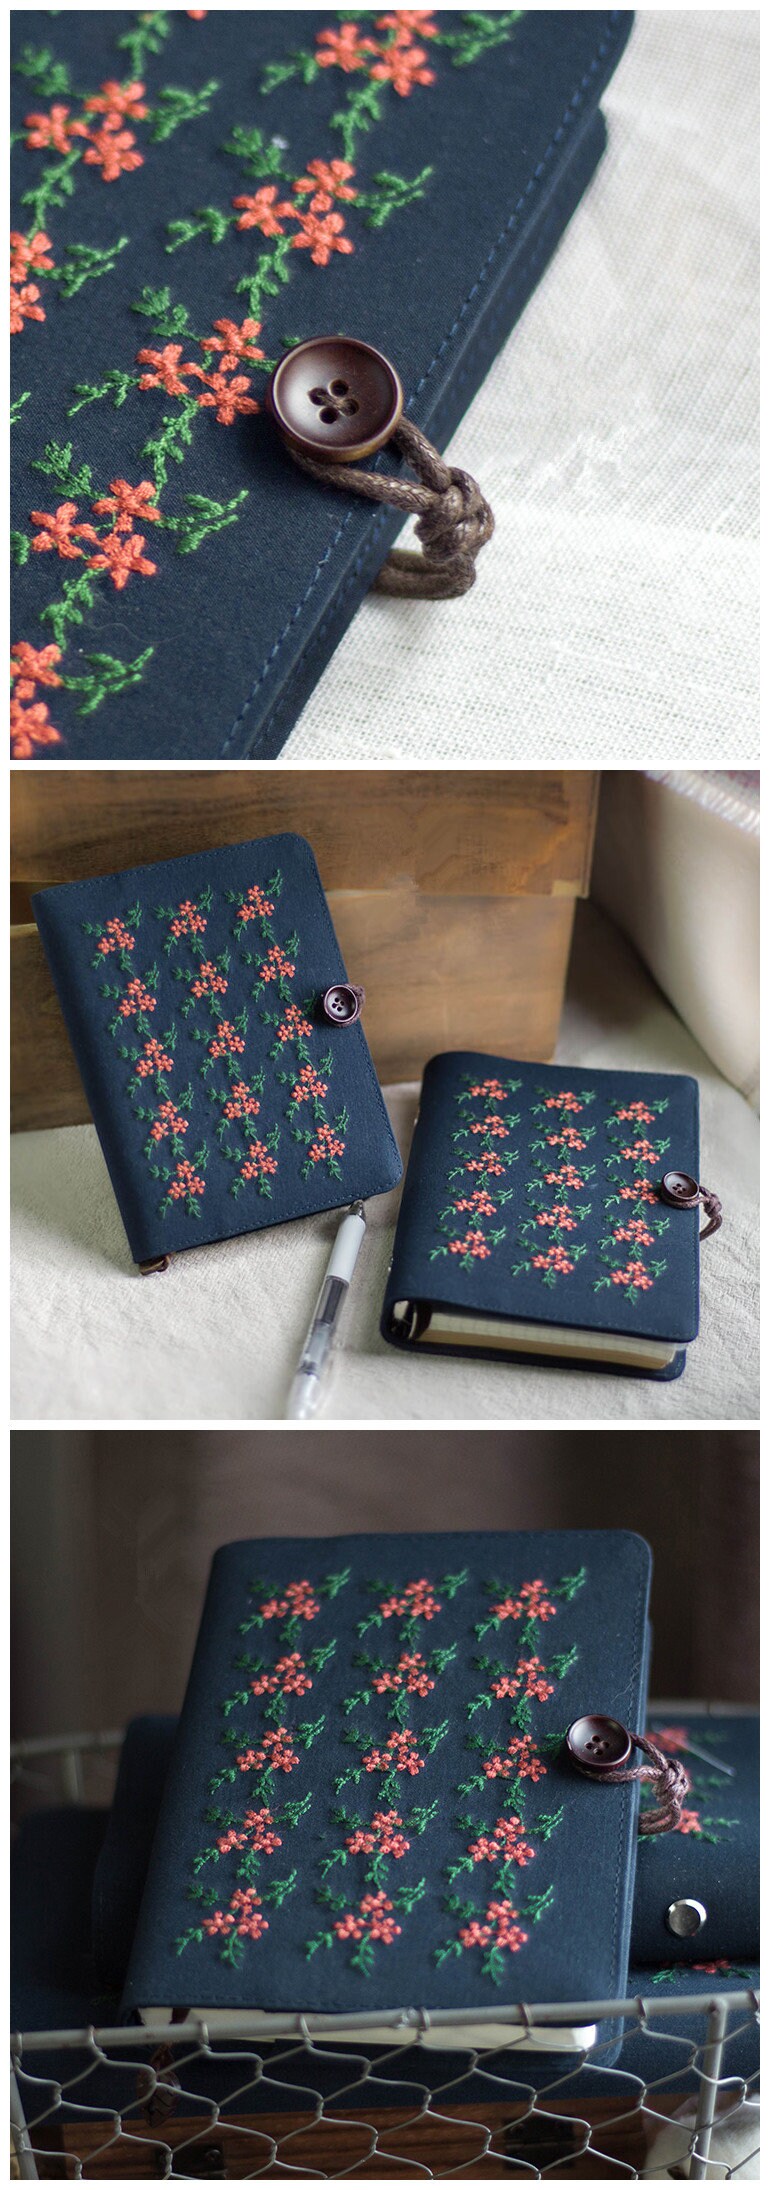 Original Embroidery Flower Journal Loose-leaf A6 A5 Handmade Notebook Literary  Portable Notepad Diary Book Cloth Ephemera Book Special Gift